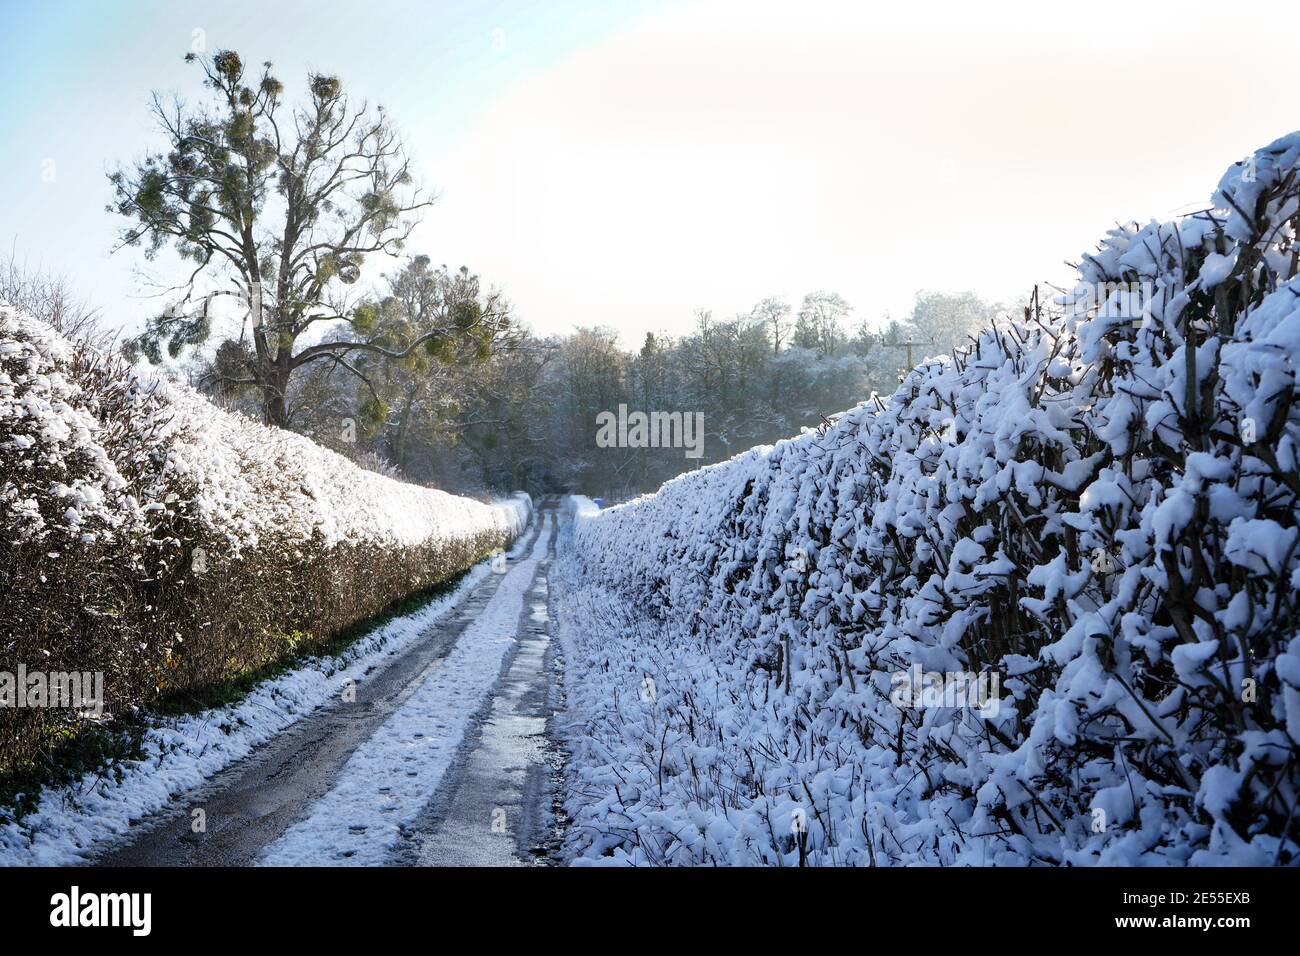 A frozen lane, covered in snow with hedges either side descending down a hill Stock Photo